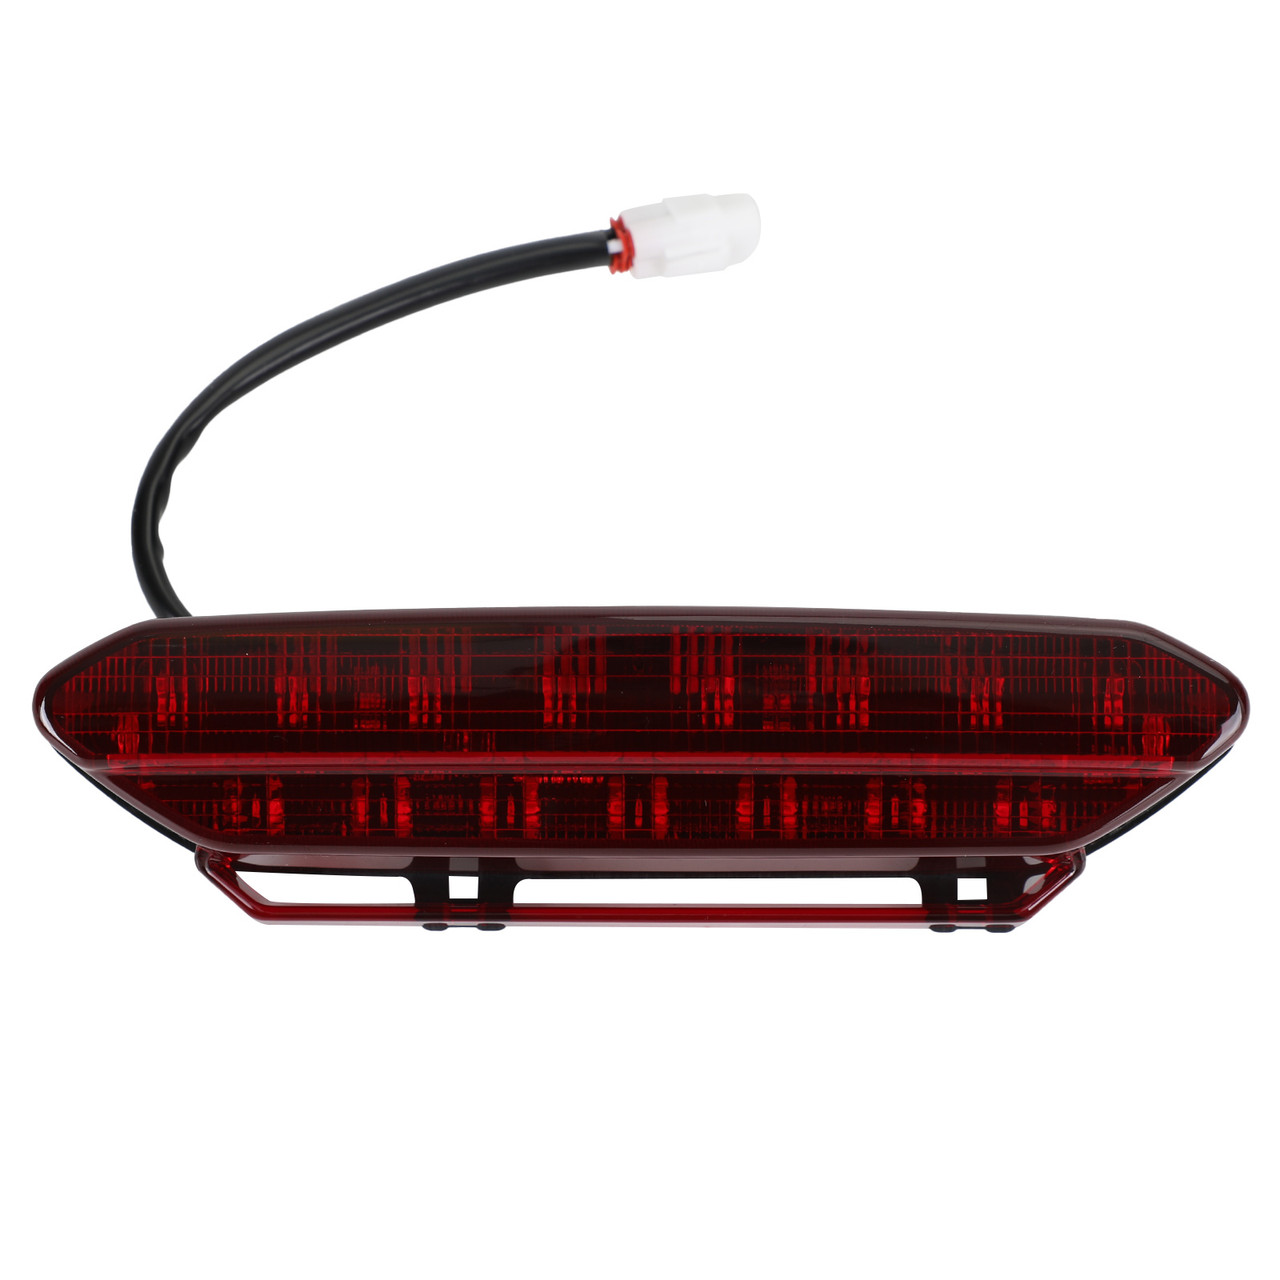 LED Tail Light Taillight for YAMAHA YFZ450 2006-2009 5TG-84710-21-00 Red